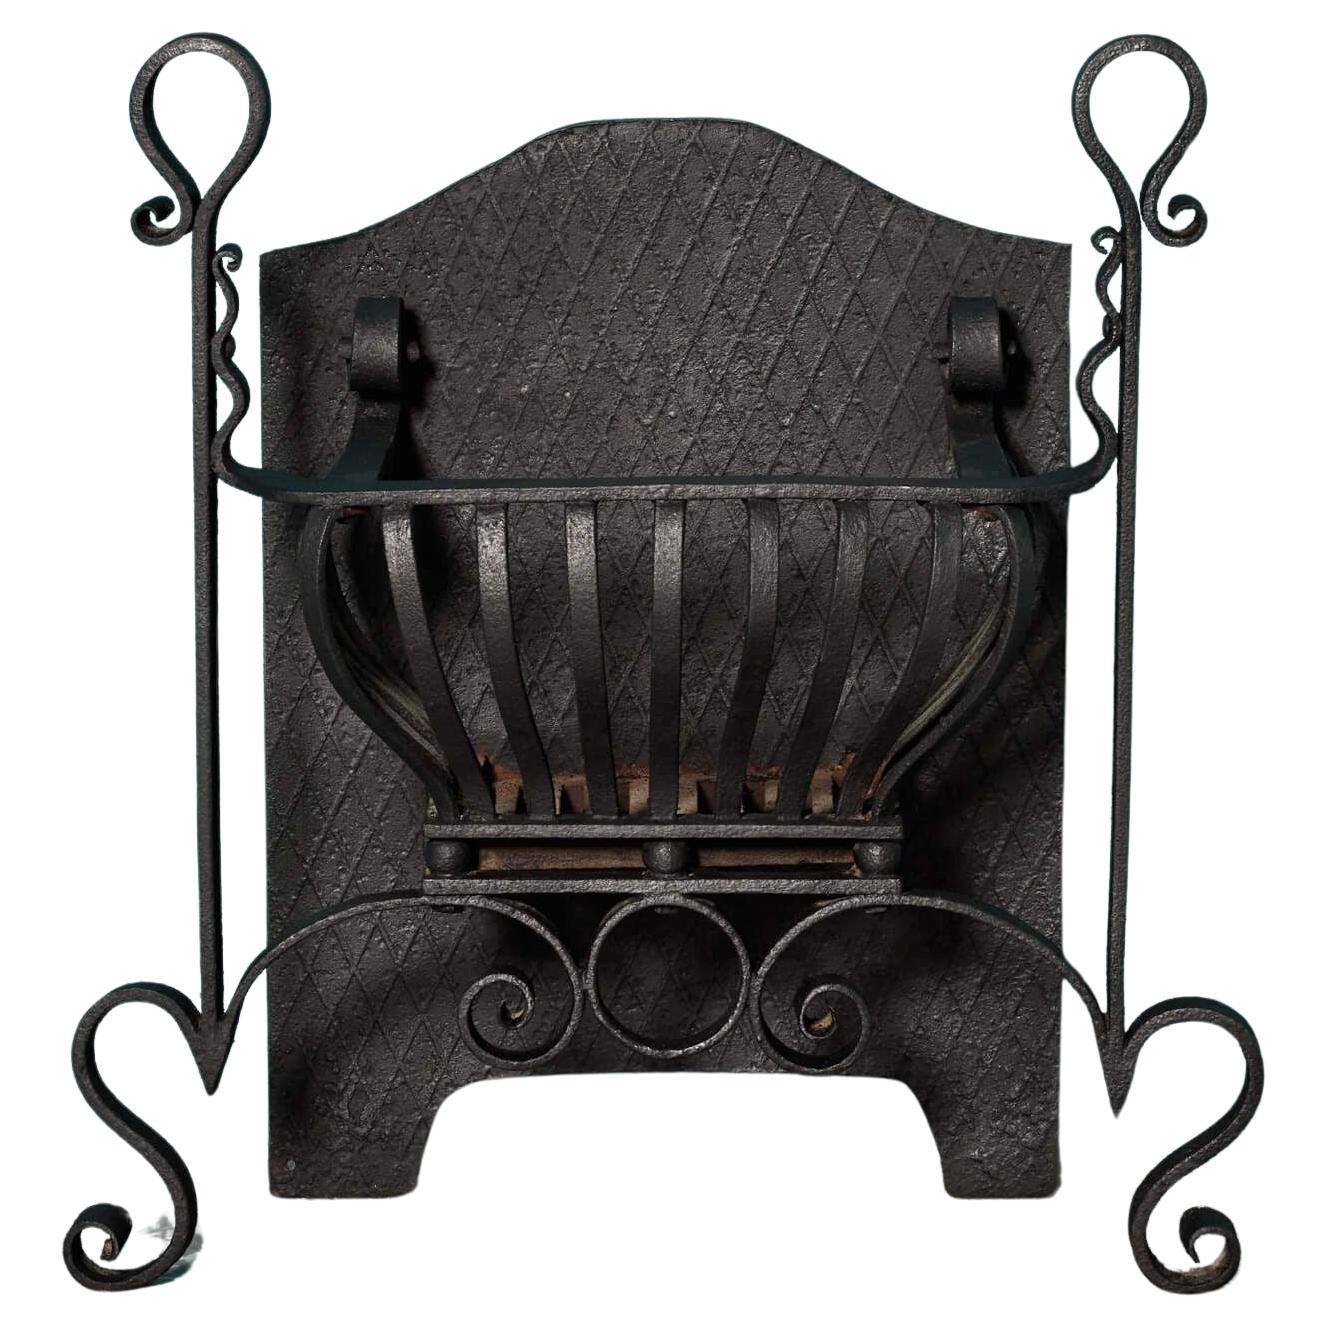 Antique Arts and Crafts Wrought Iron Fire Grate